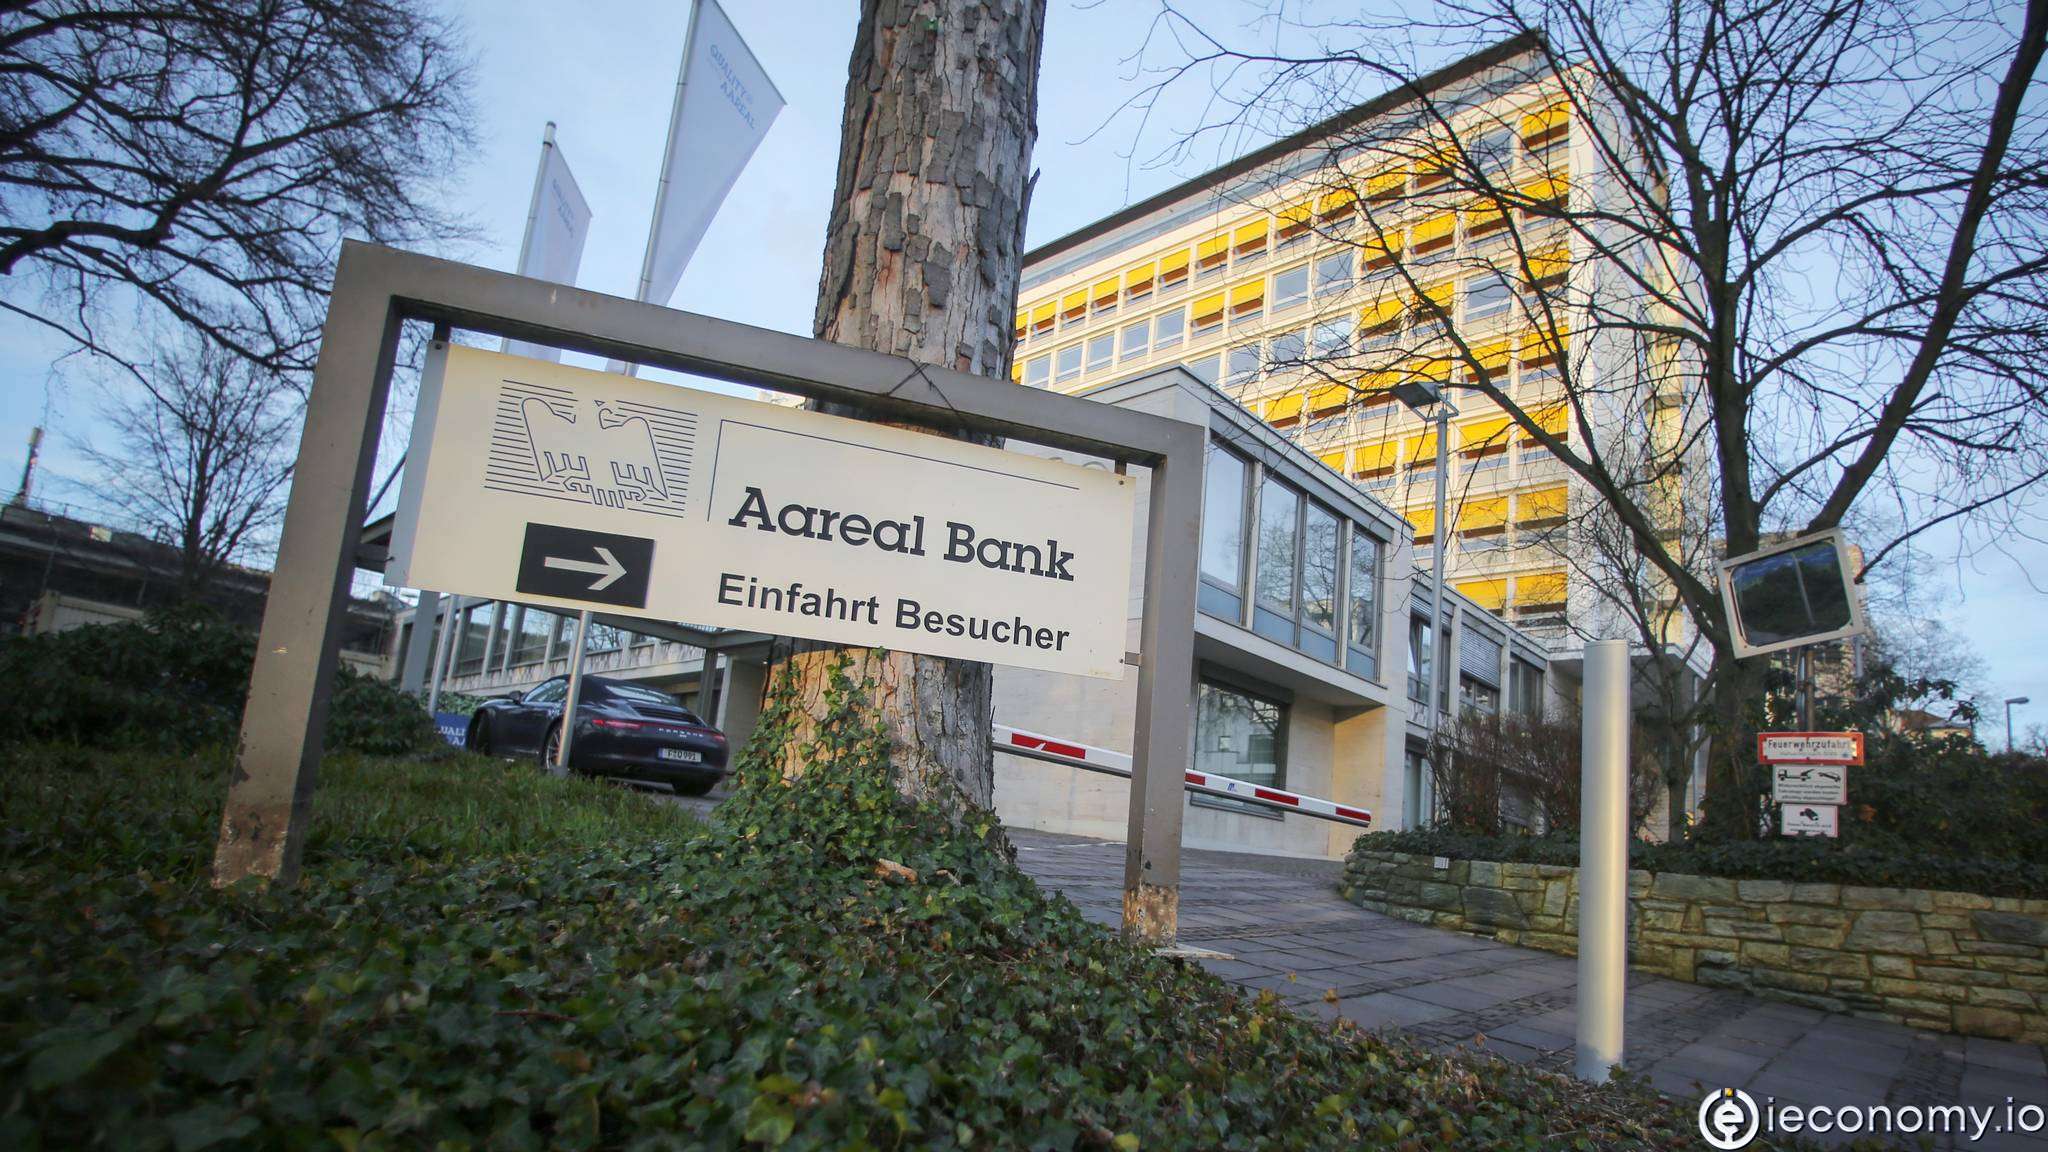 Centerbridge and Advent want to take over Aareal Bank